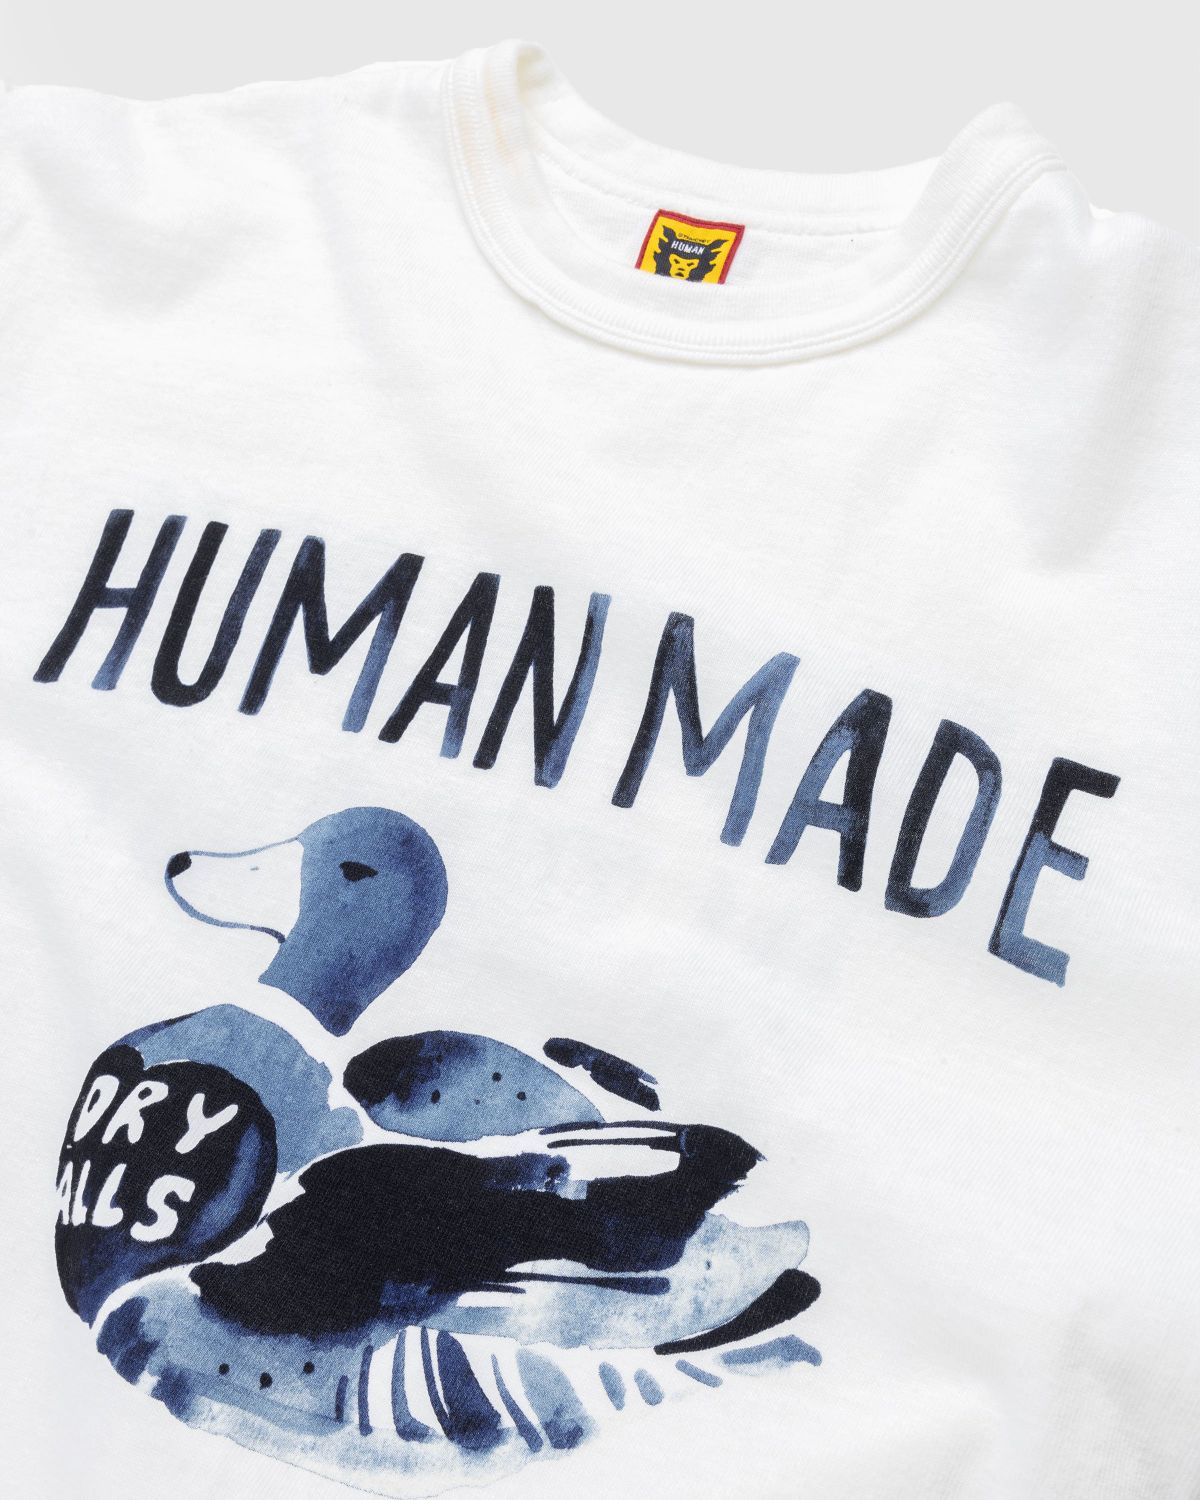 Human Made Human Made Dry Alls Duck Tee